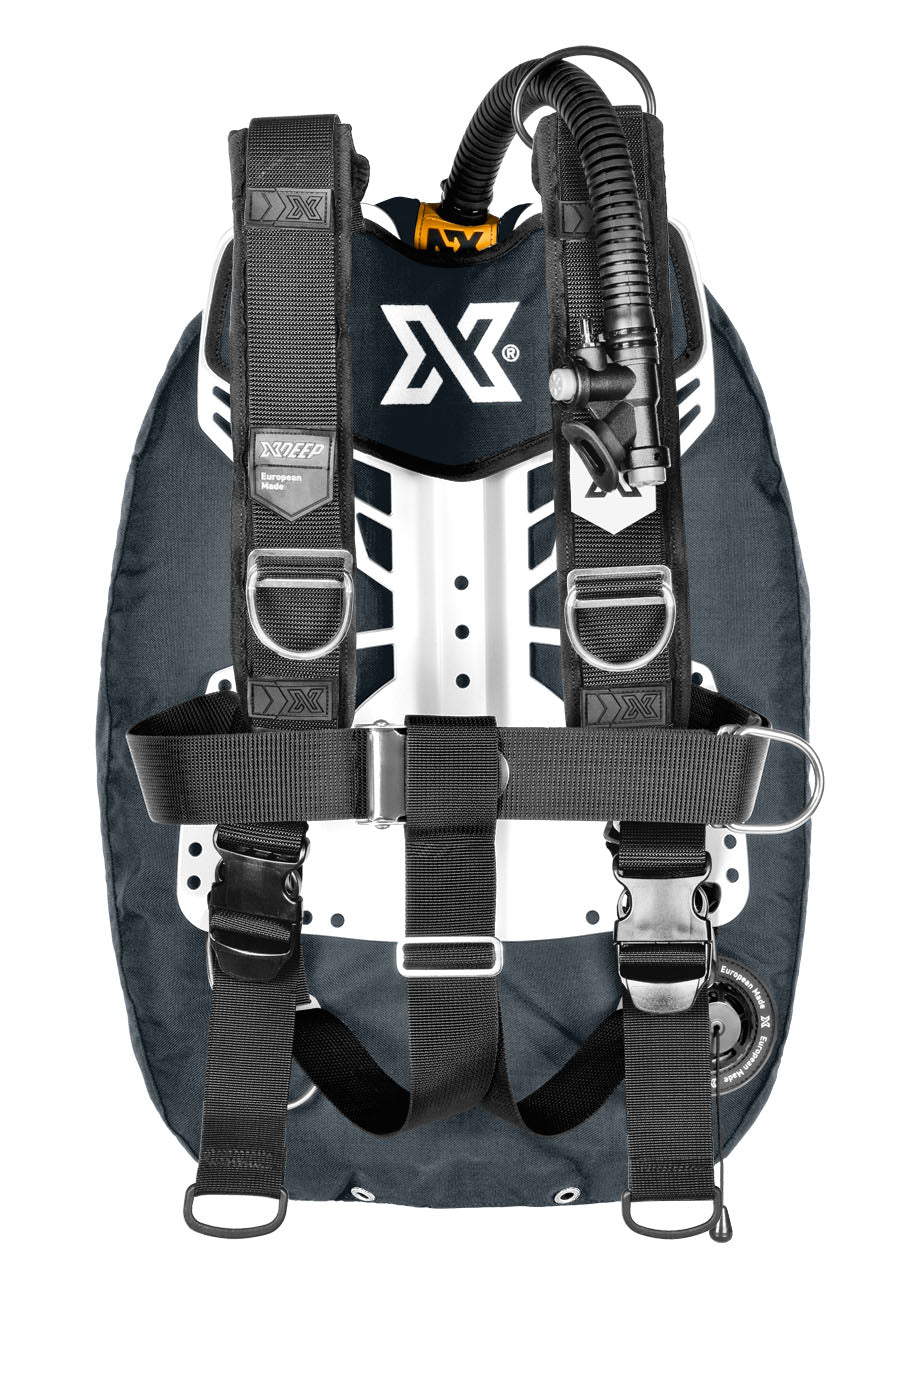 XDEEP XDEEP Zen Wing System Deluxe with Small / Dark Grey / Alumminium - Oyster Diving